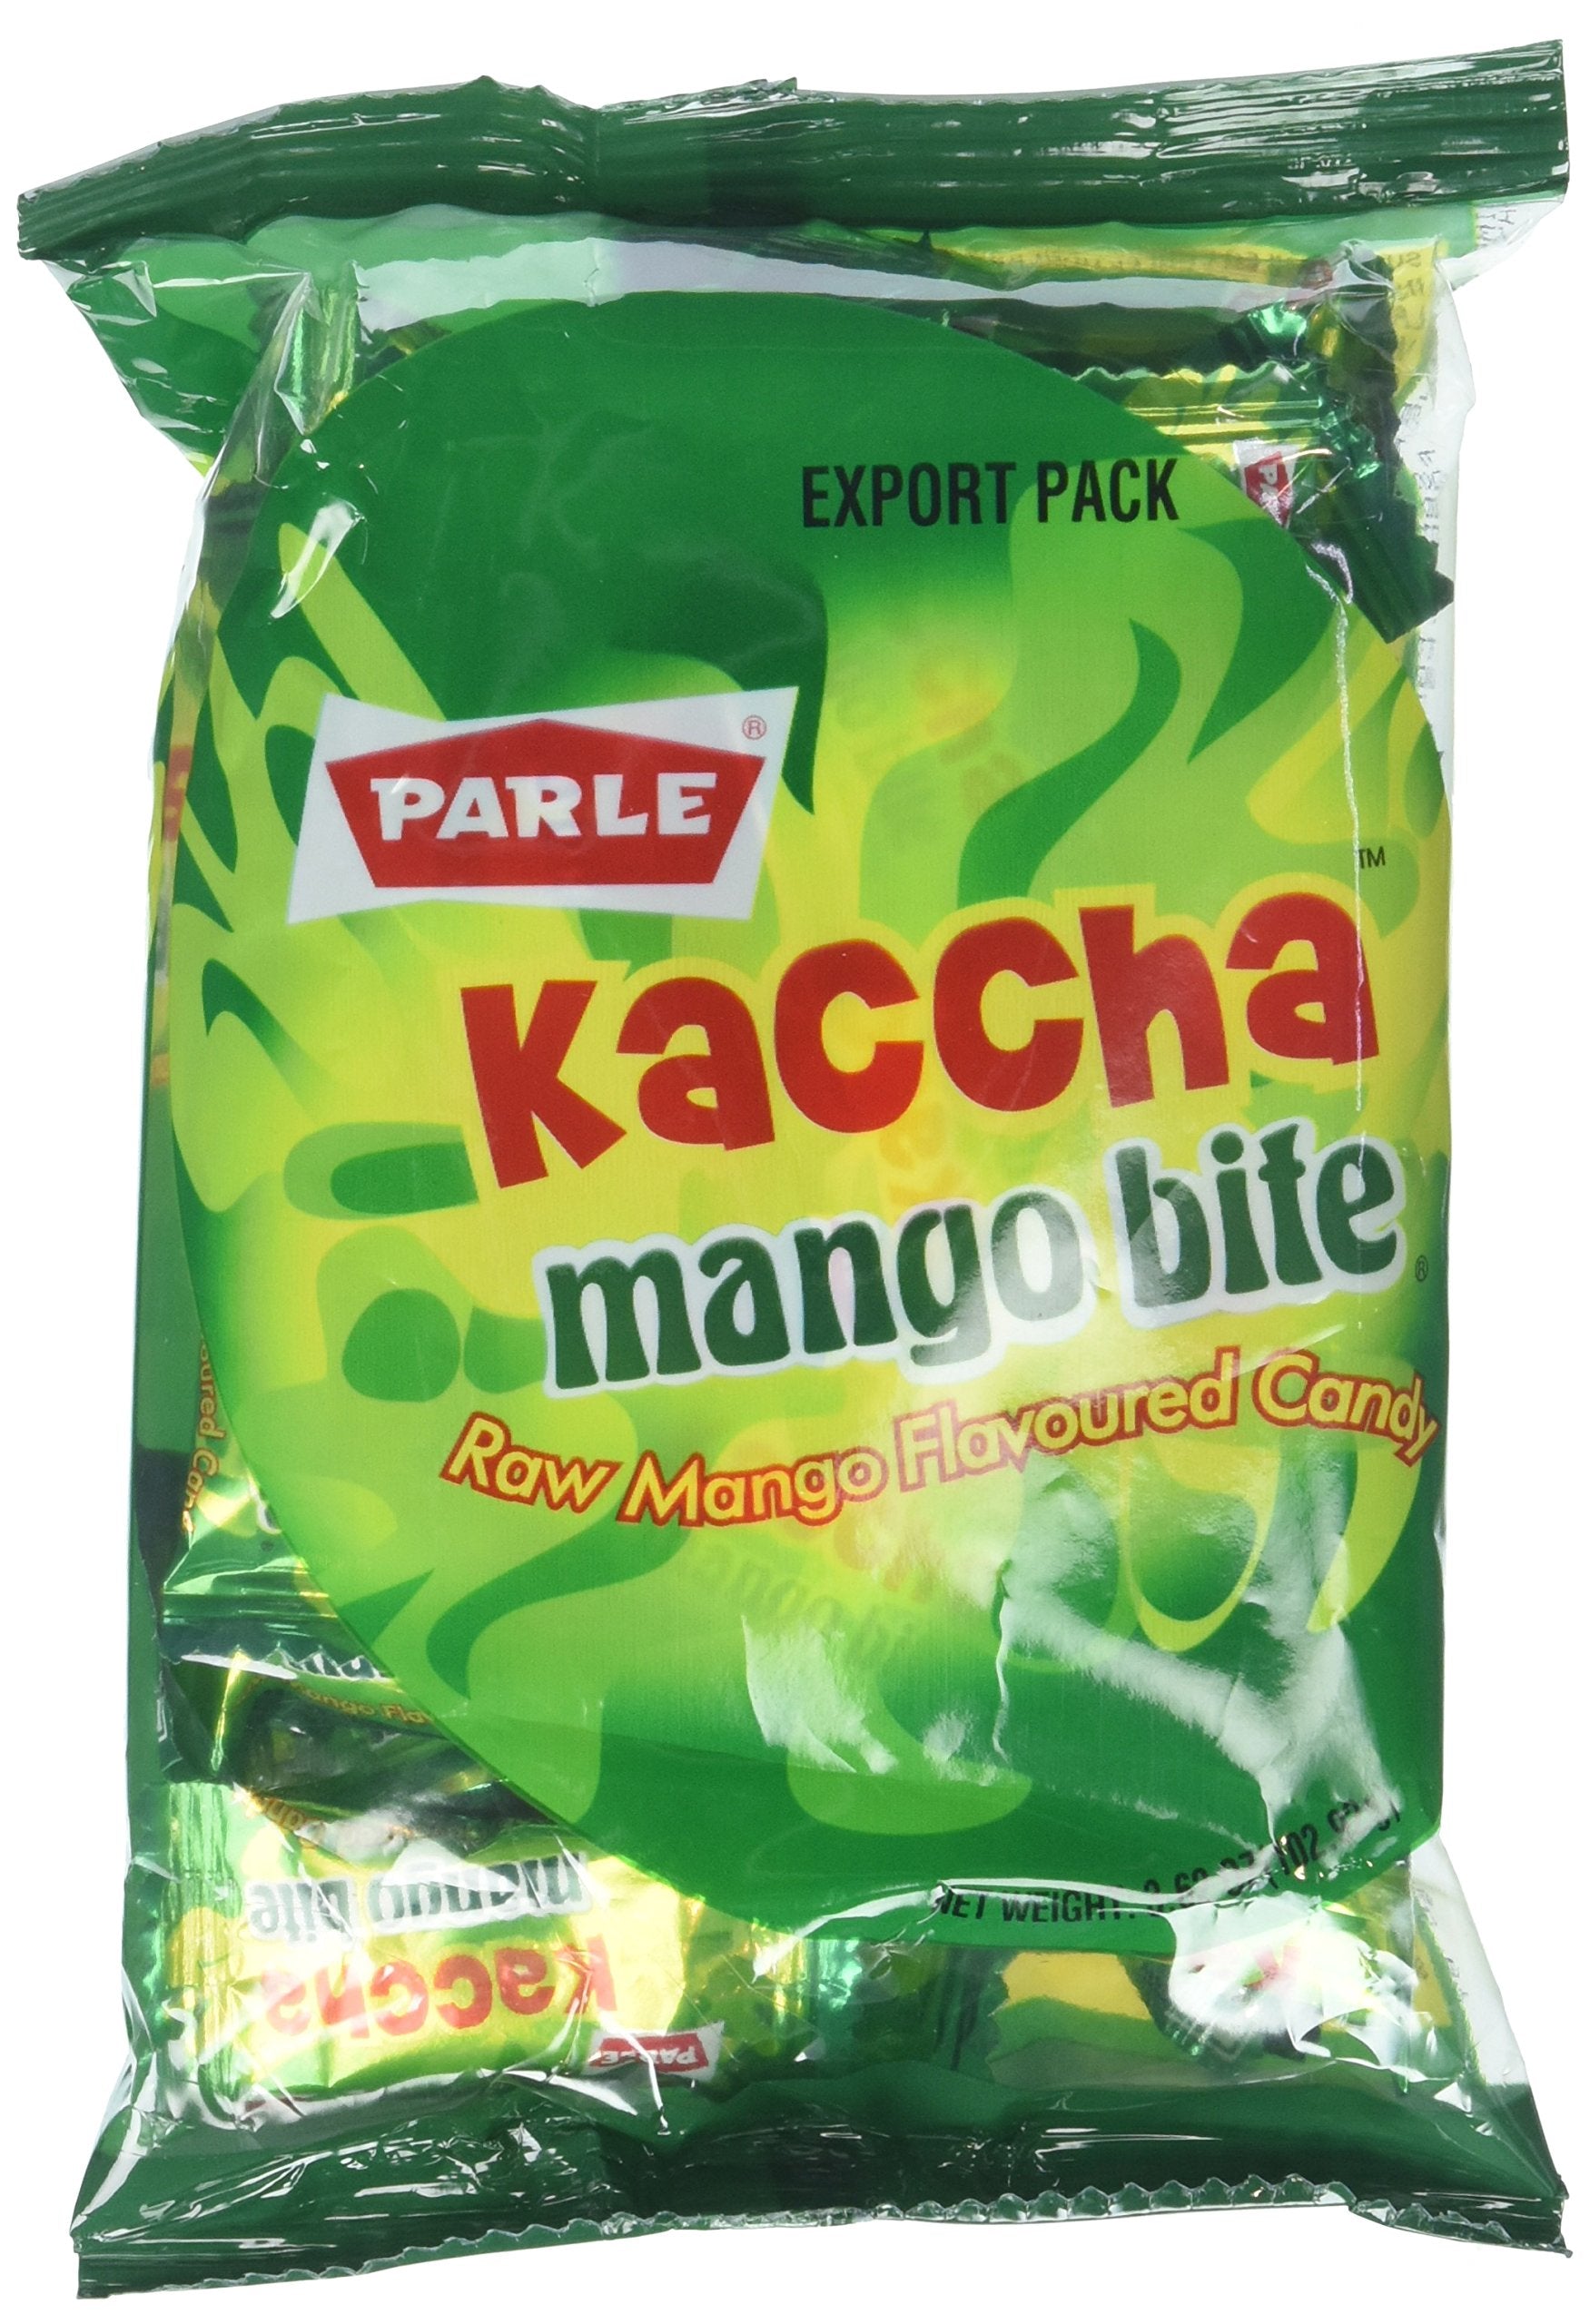 Parle Kaccha Mango Bite - Raw Mango Flavored Candy - 102.92 Grams (Pack of 3 for a total of 96 Candy)